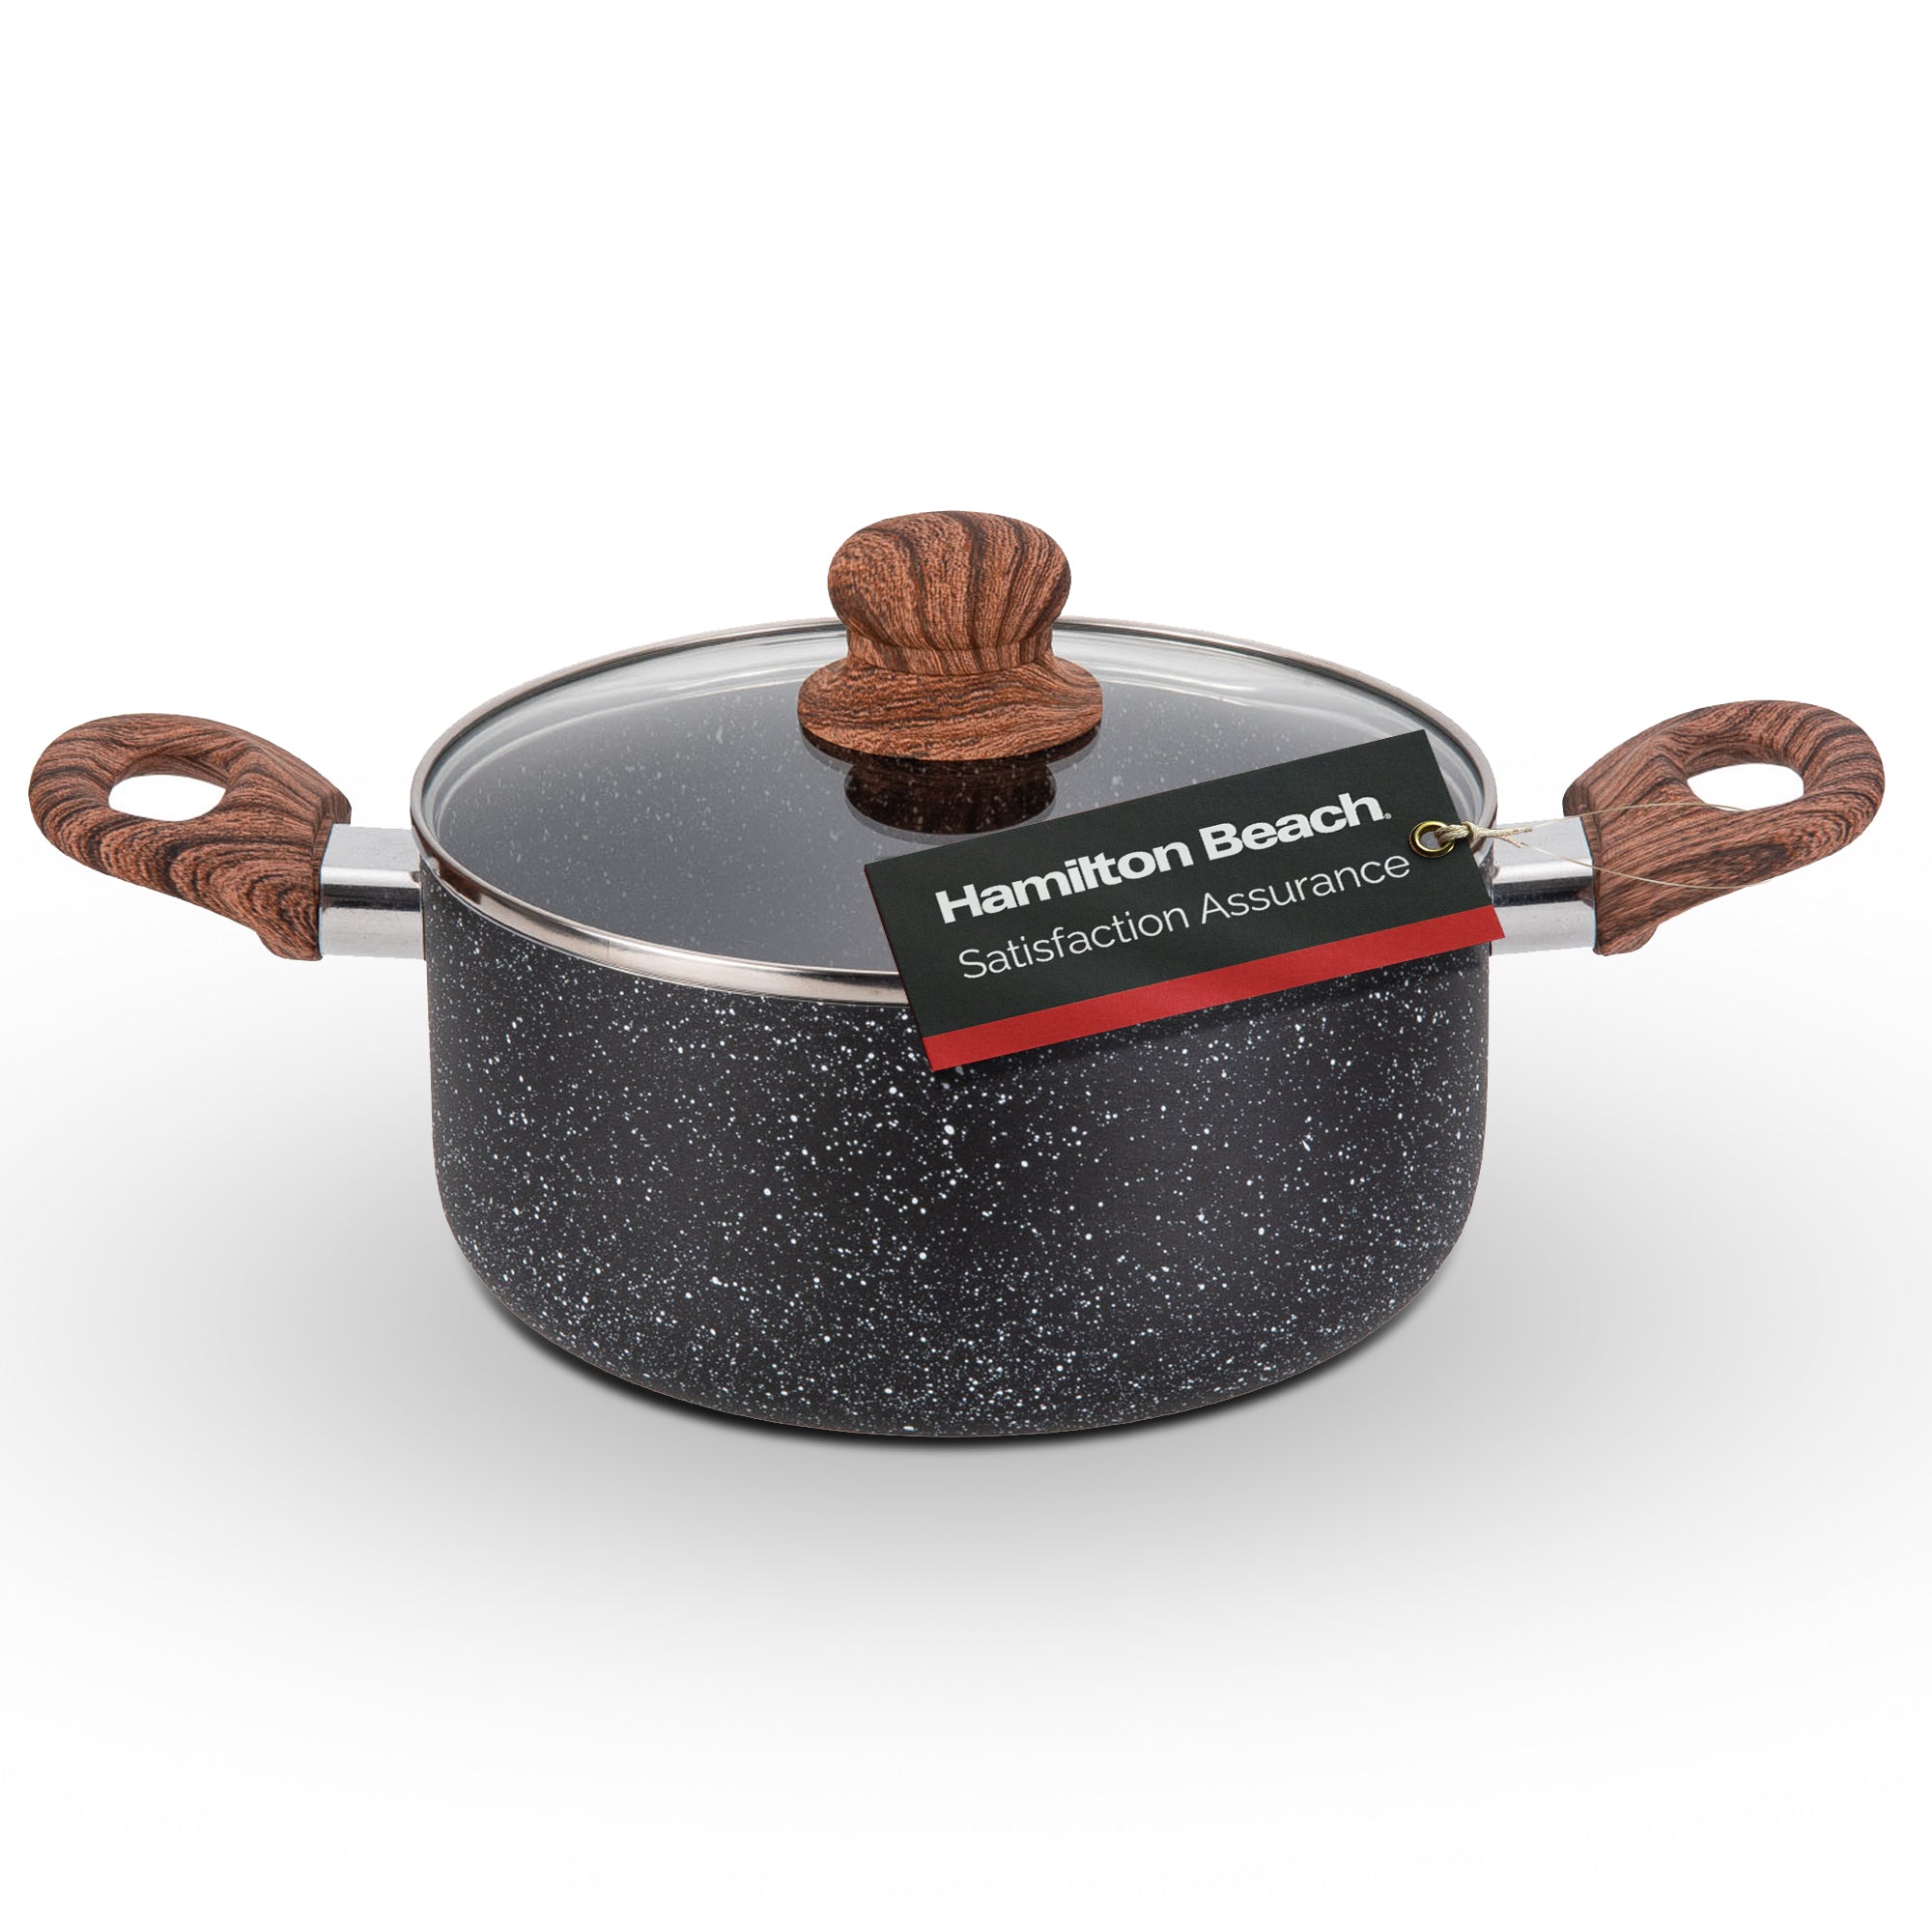 Hamilton Beach 3 Quart Aluminum Nonstick Marble Coating Even Heating Round Dutch Oven Pot with Glass Lid and Wooden Like Soft Touch Handle, Dutch Oven Pot for Baking, Braising, Roasting, and More